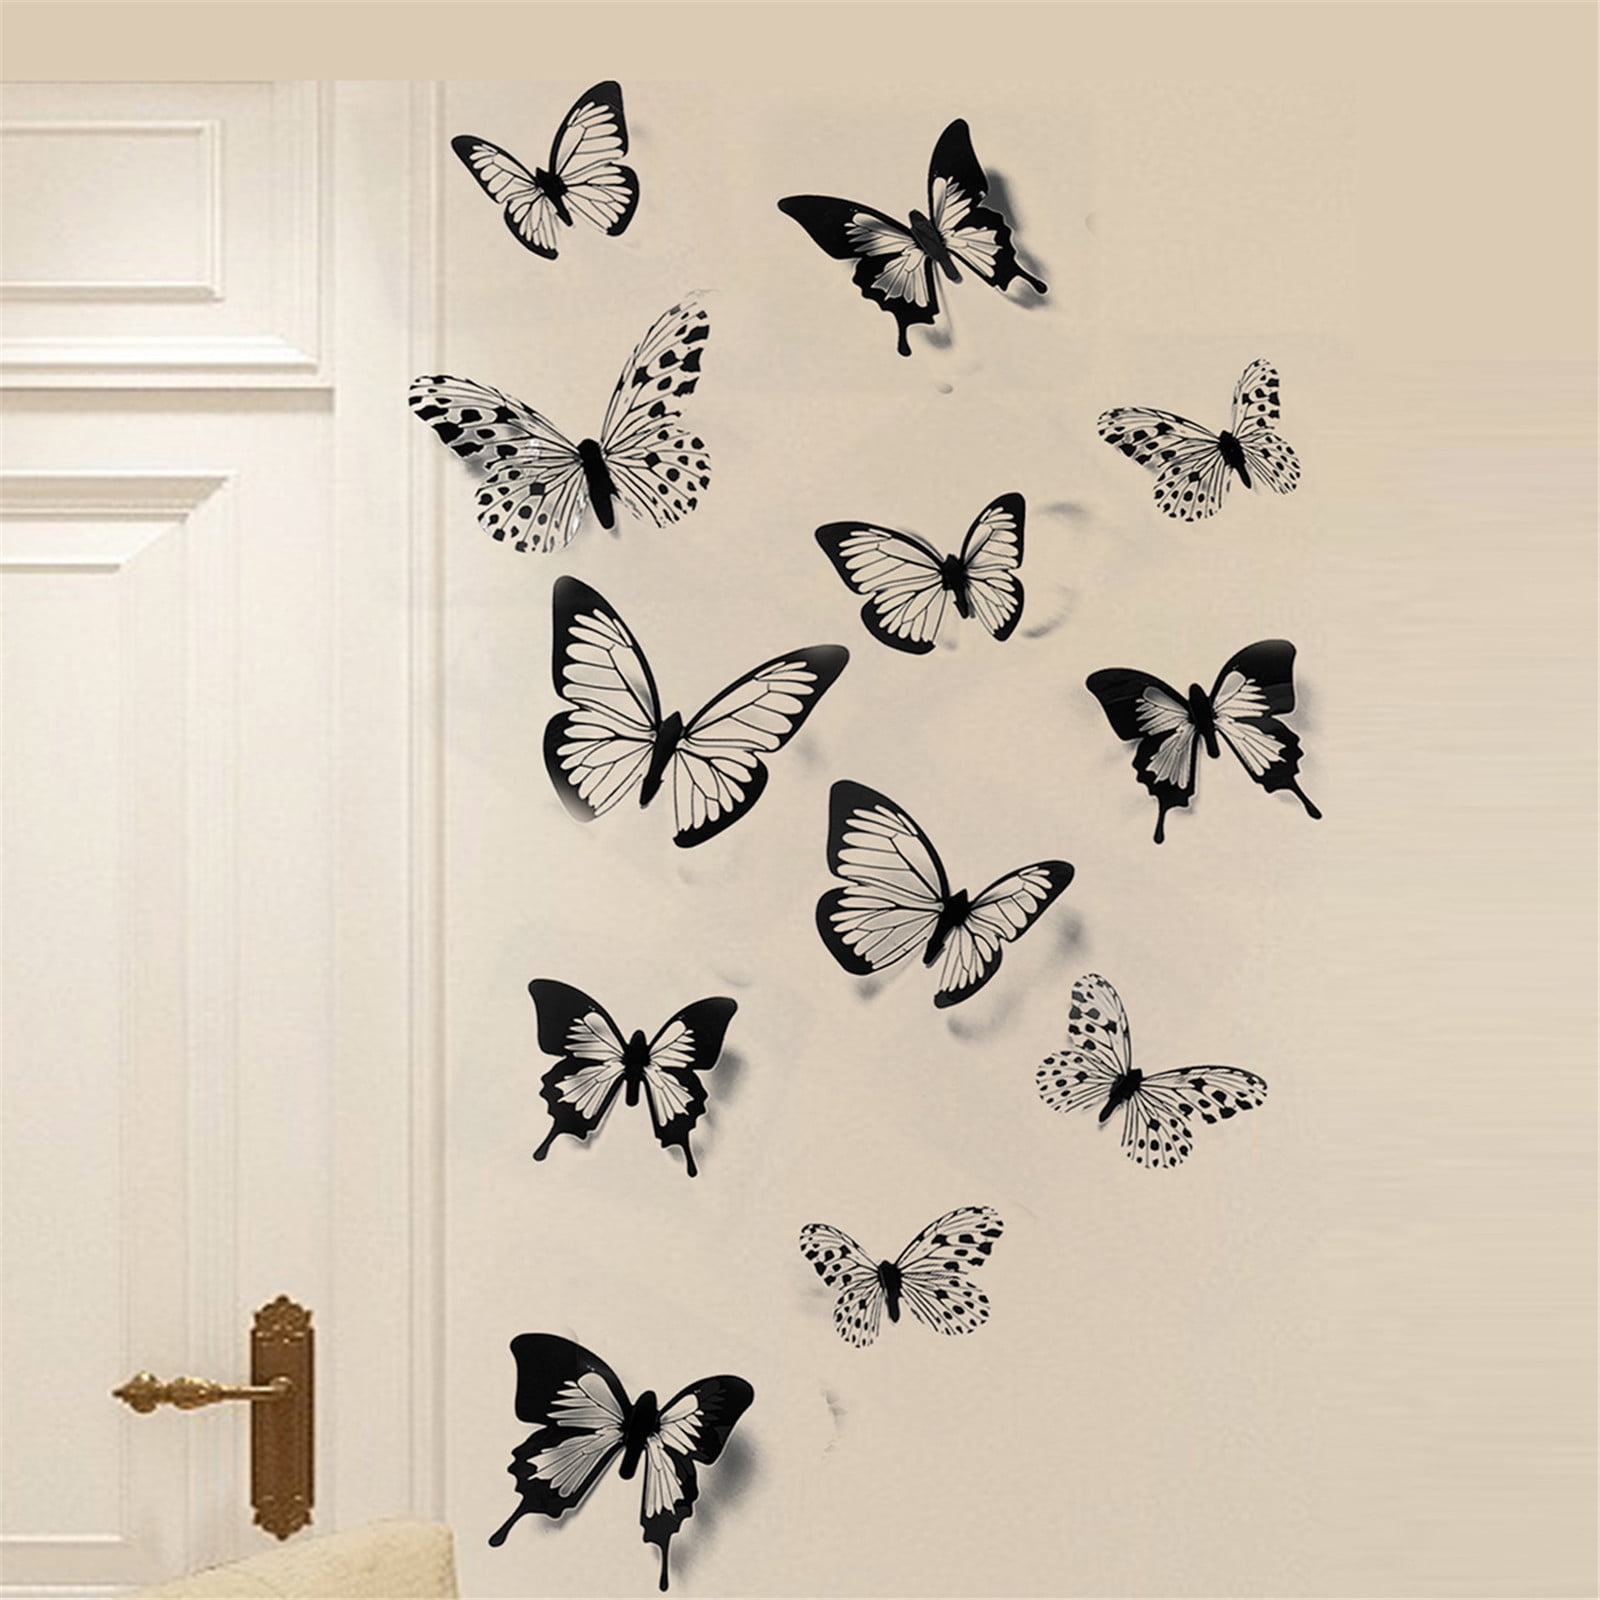 12-24pcs 3D Butterfly Wall Stickers Art Decal Home Room Decorations Decor Kids 